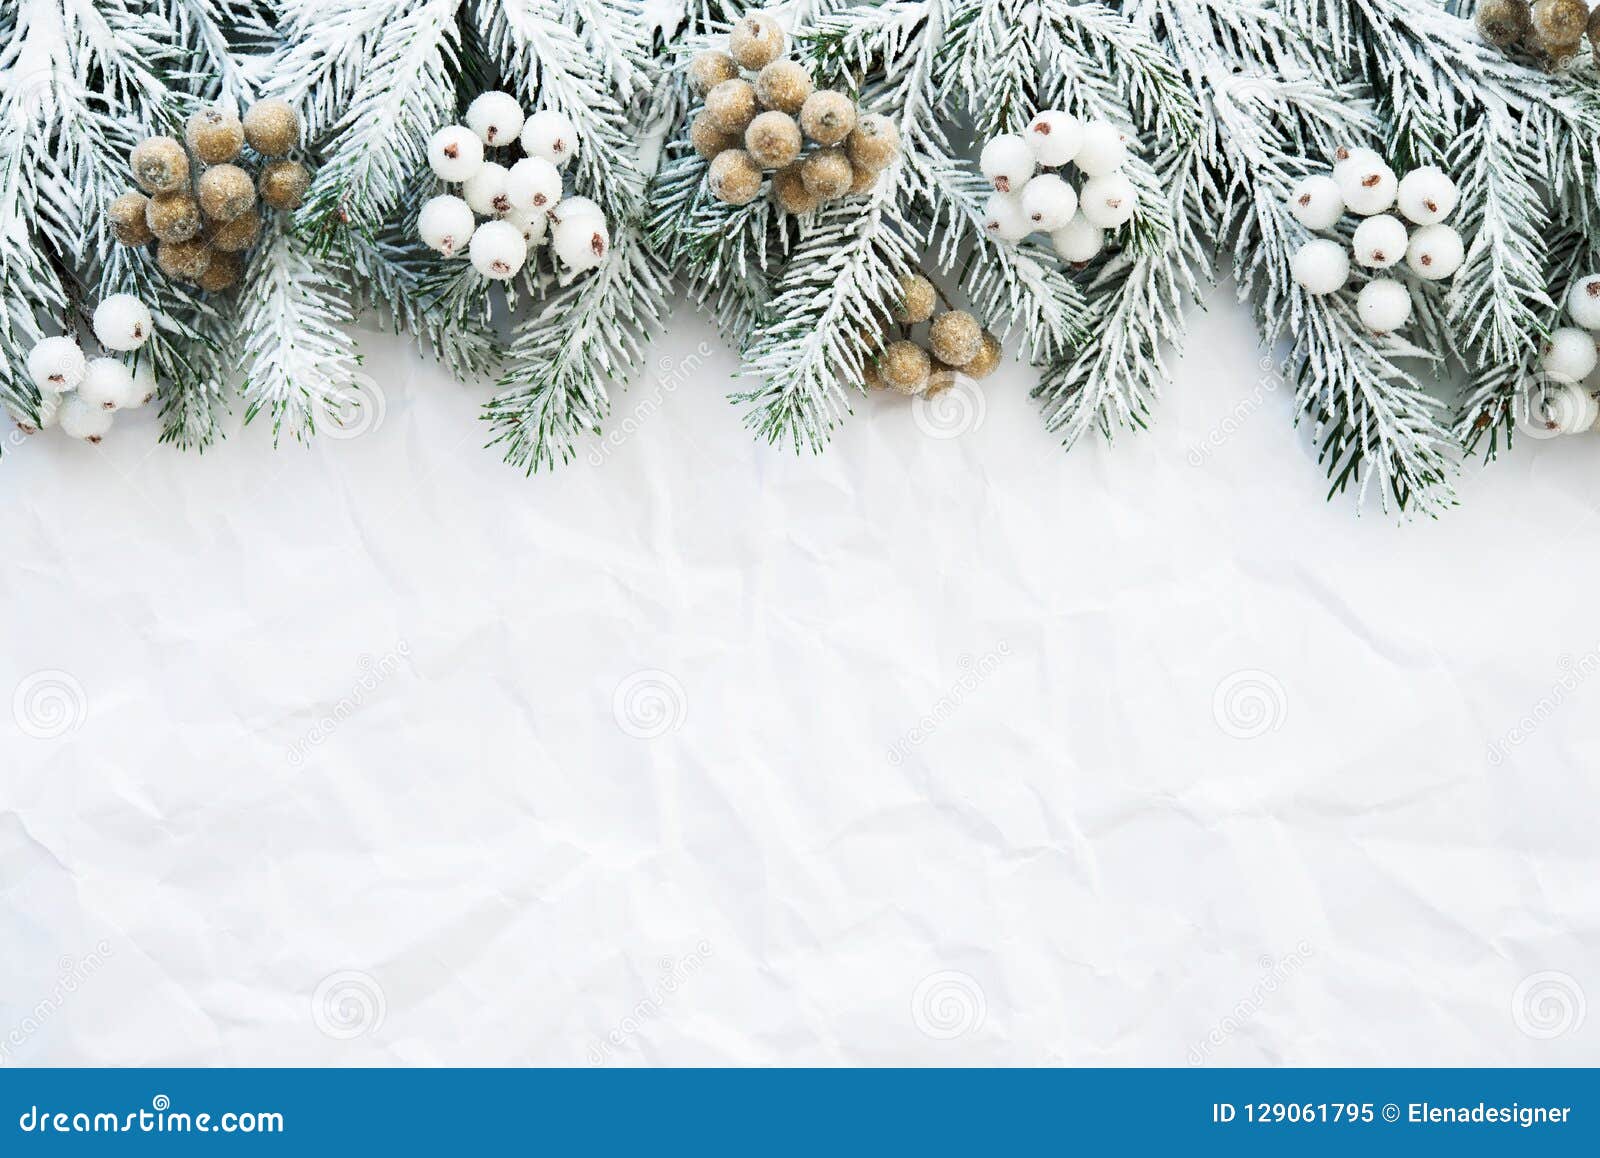 Christmas and New Year Holiday Background. Xmas Greeting Card. Winter ...